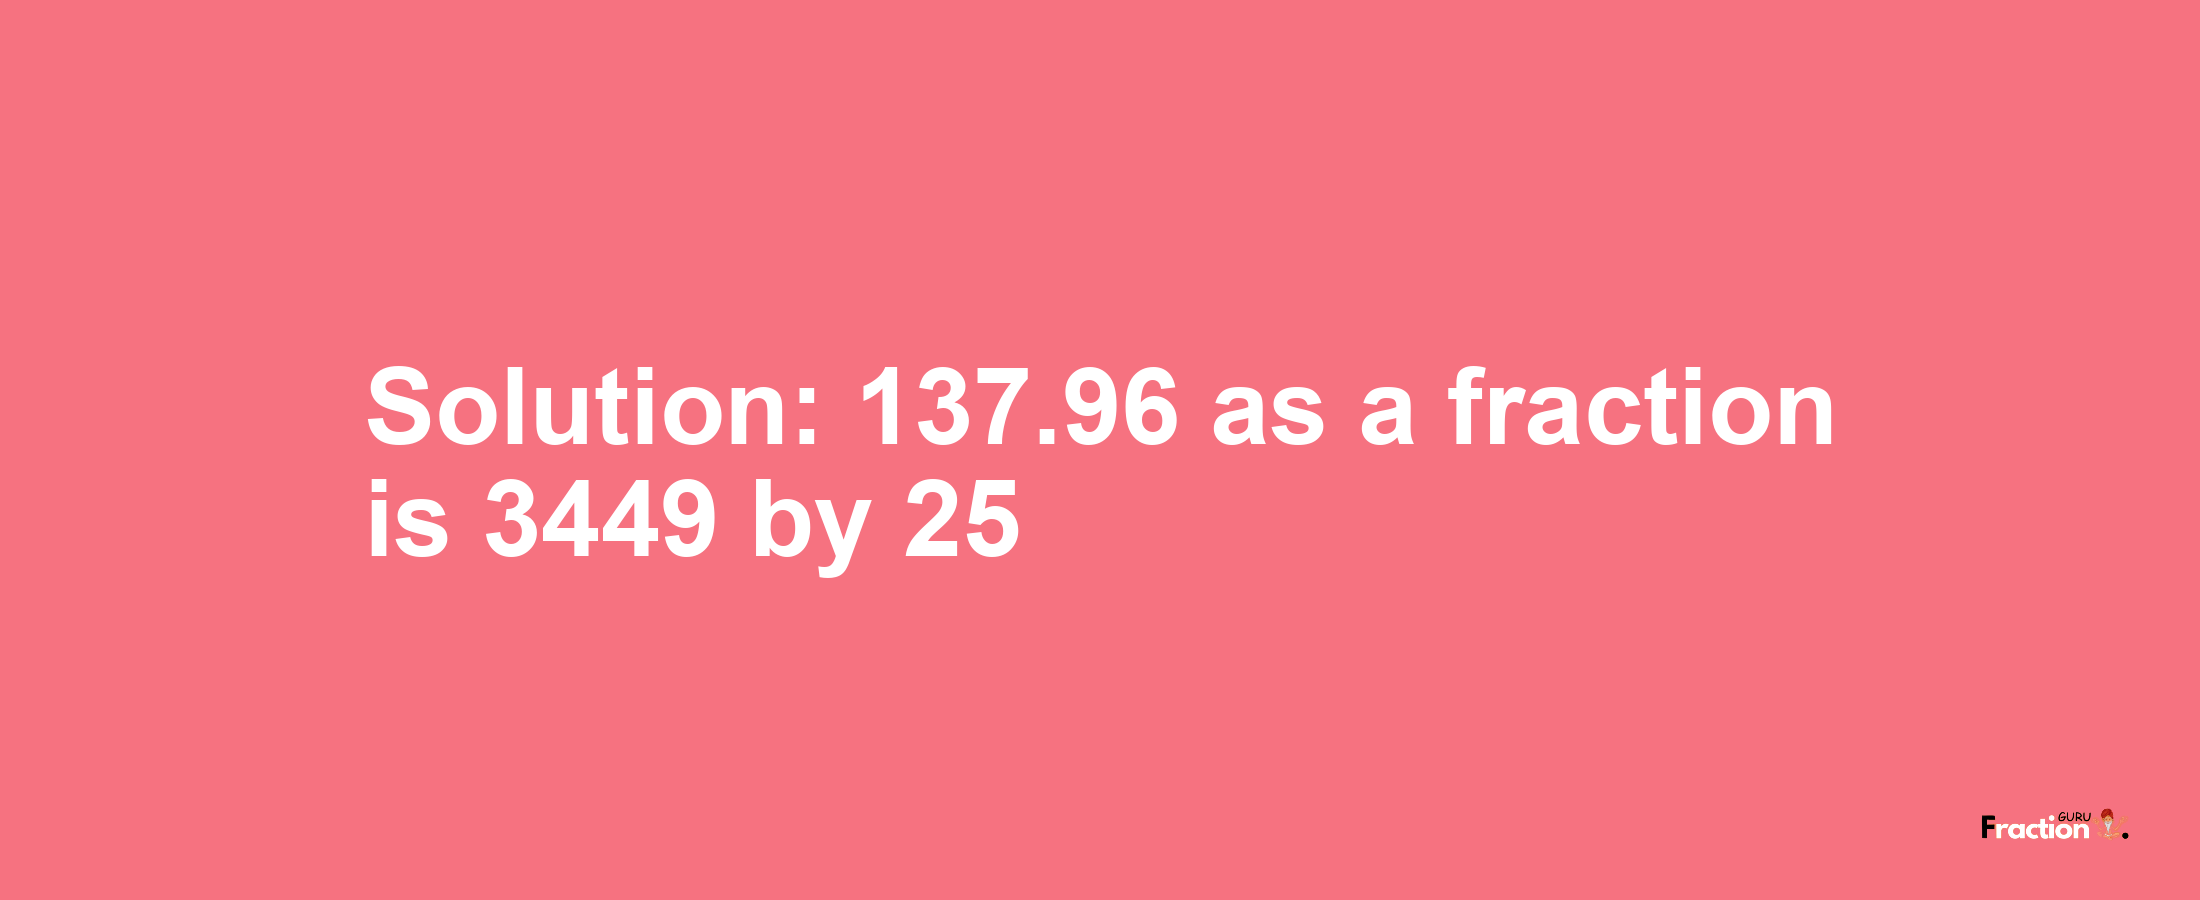 Solution:137.96 as a fraction is 3449/25